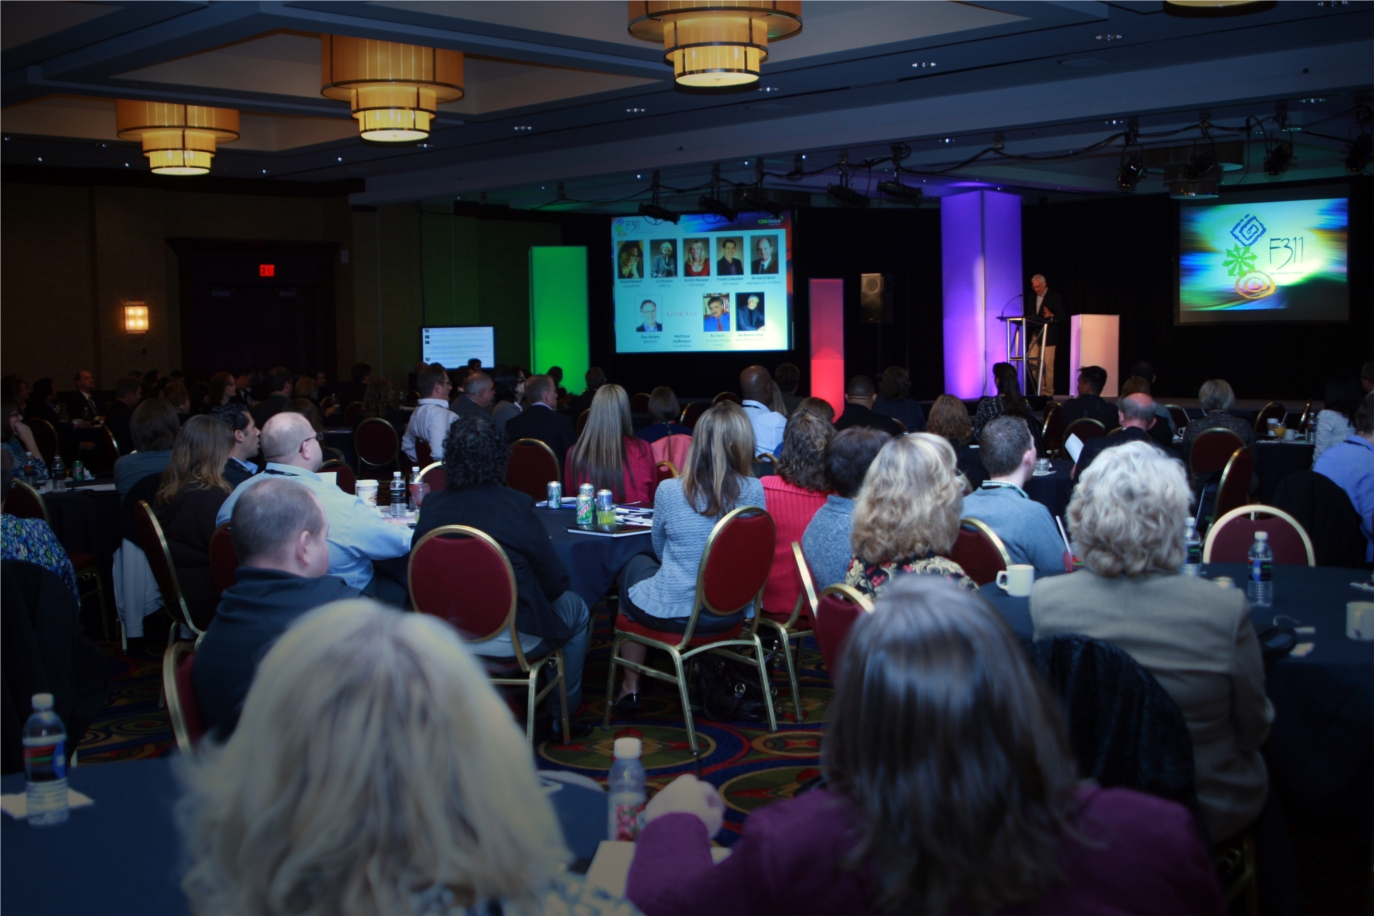 The CDS Global Client Summit attracts world-renowned speakers and clients across multiple industries to Des Moines each year.